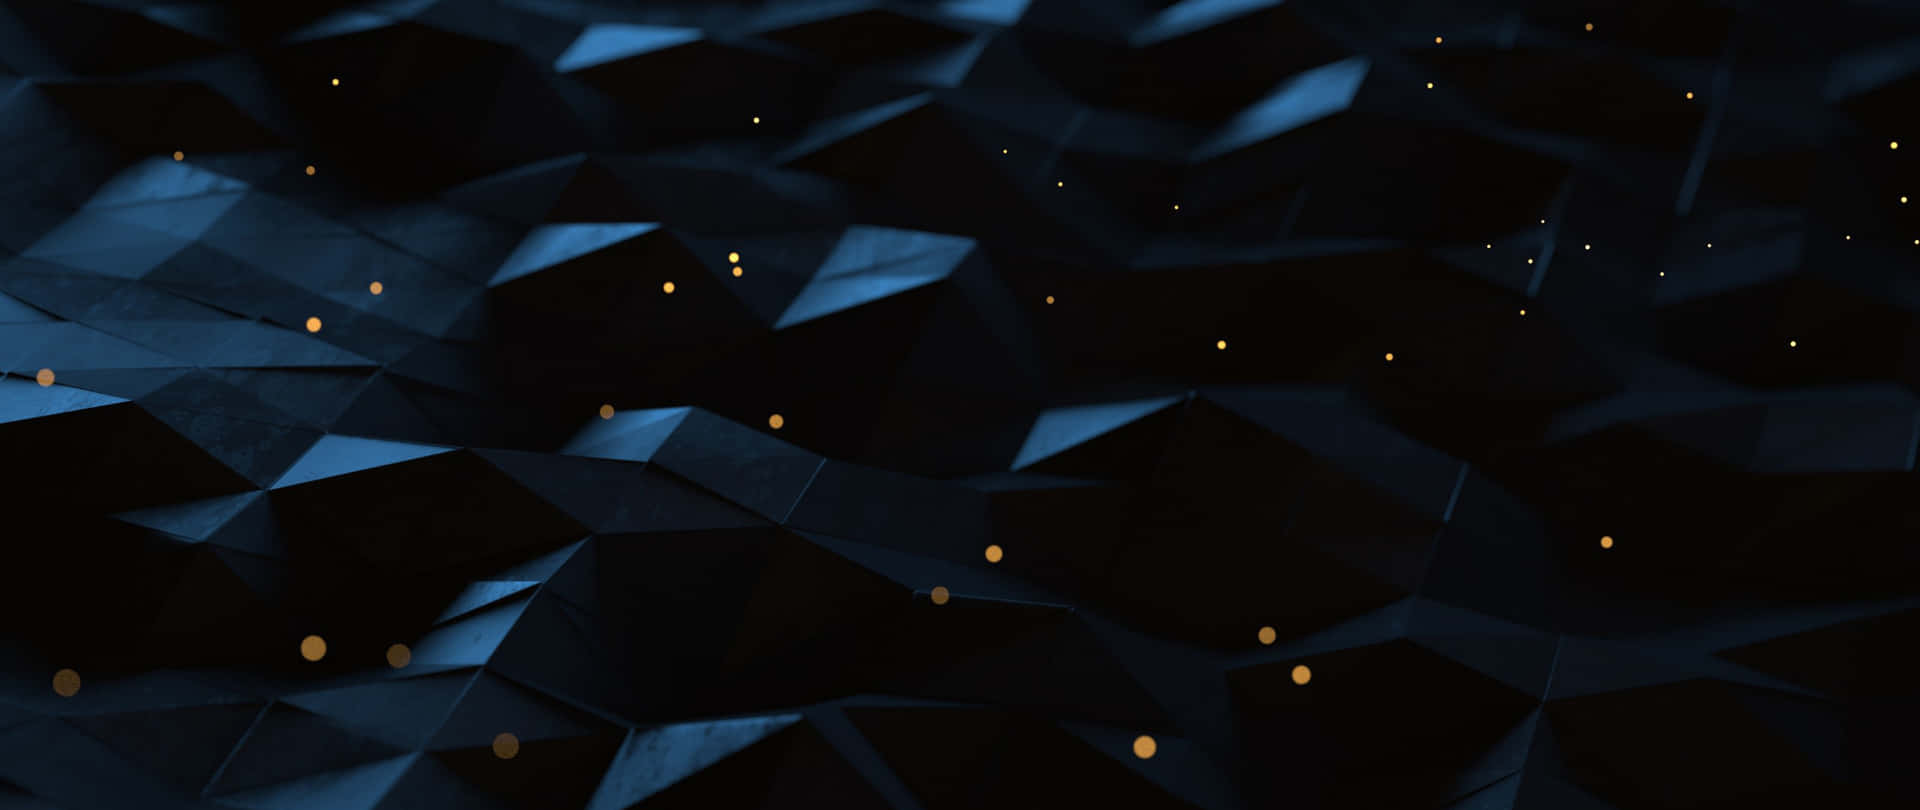 A Black Background With Gold Stars And Triangles Background